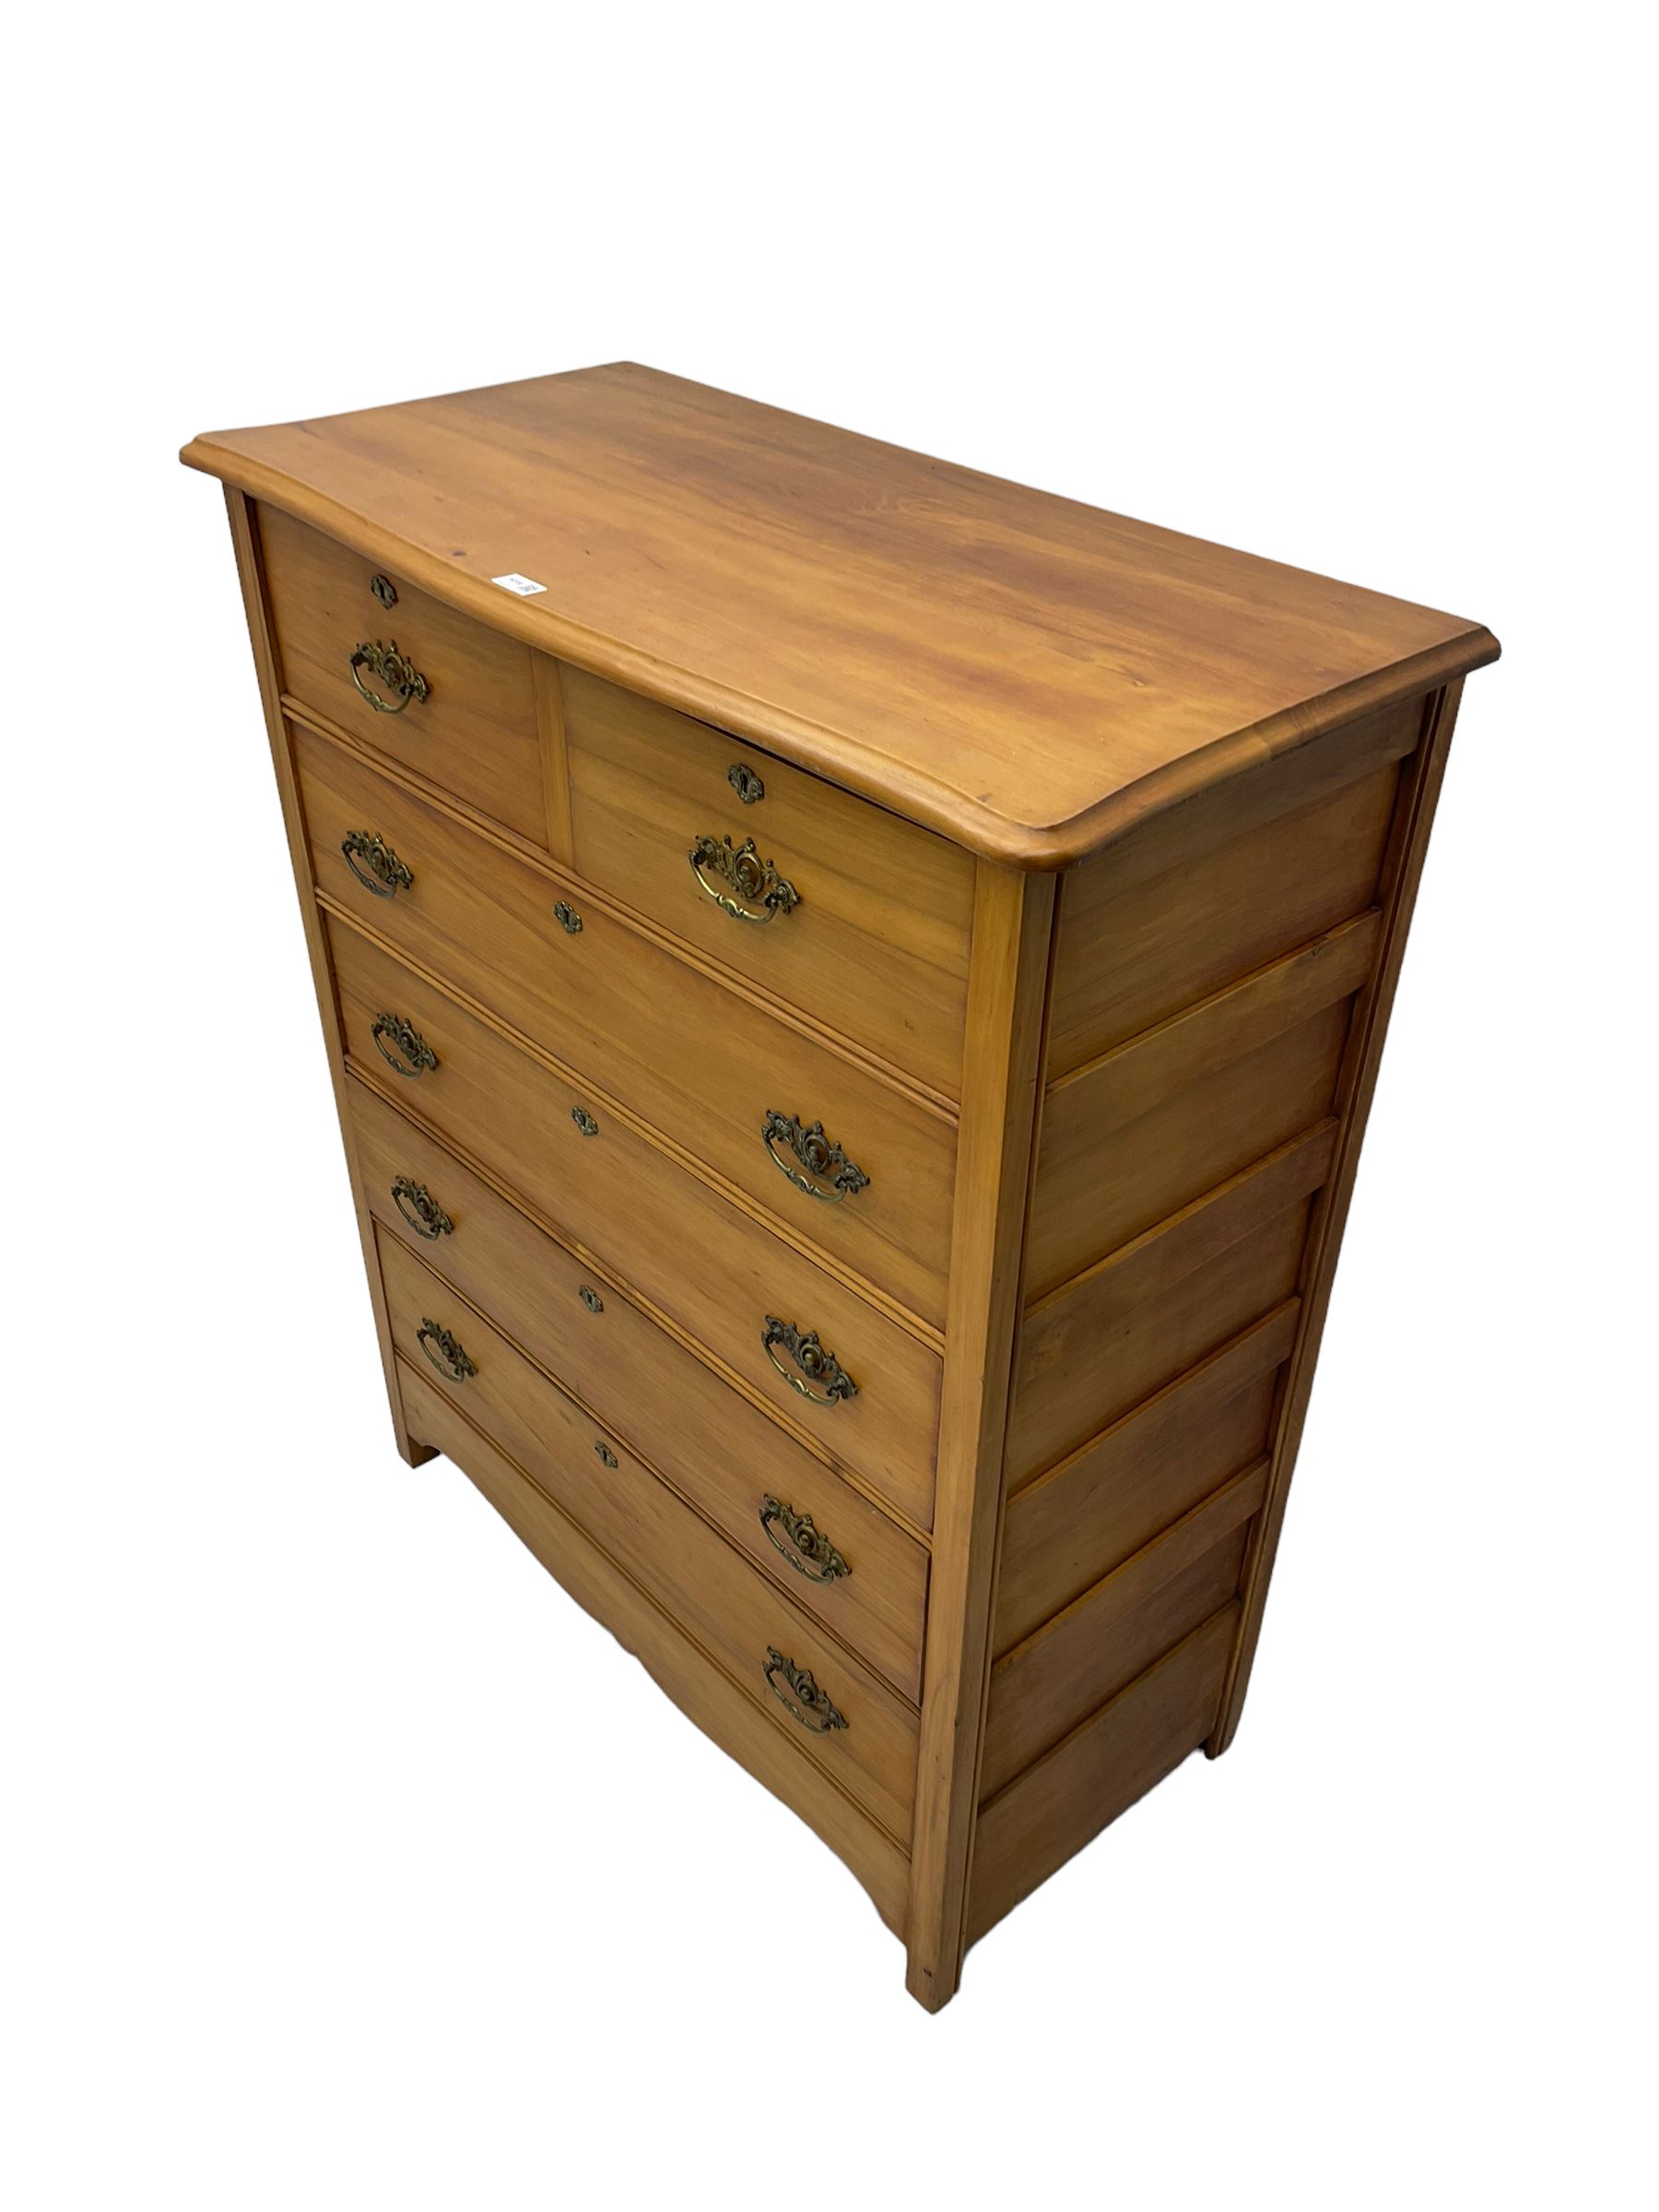 Late Victorian satin walnut chest - Image 4 of 5